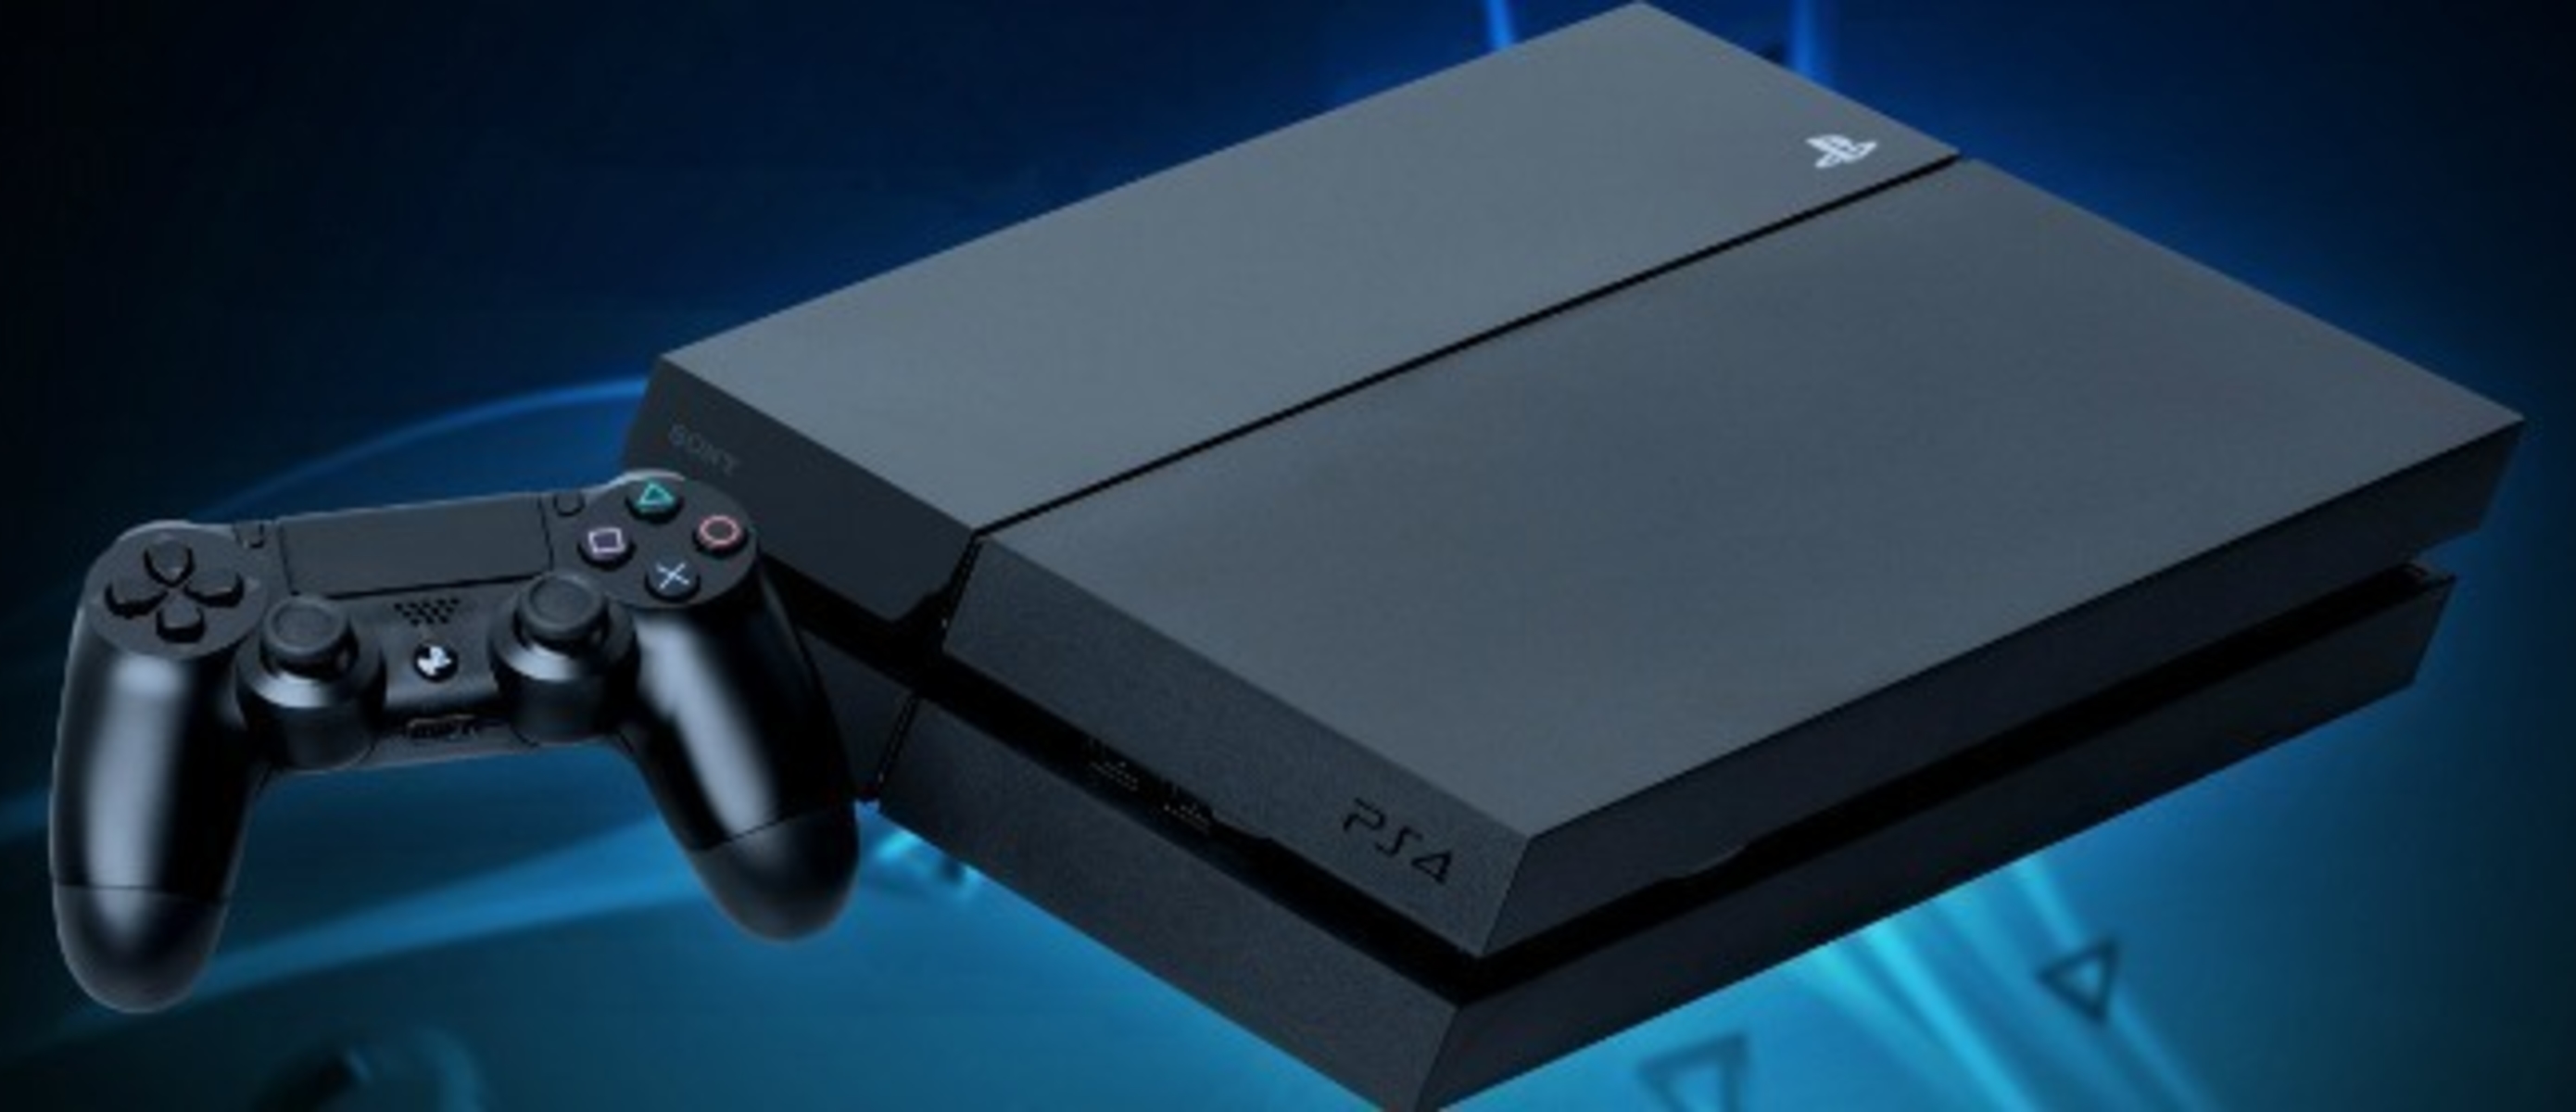 Ps5 wifi. Сони плейстейшен ps4. Sony PLAYSTATION 4 ps4. Приставки ps2 / ps3 / ps4 / Xbox / Nintendo. Console PLAYSTATION ps4.